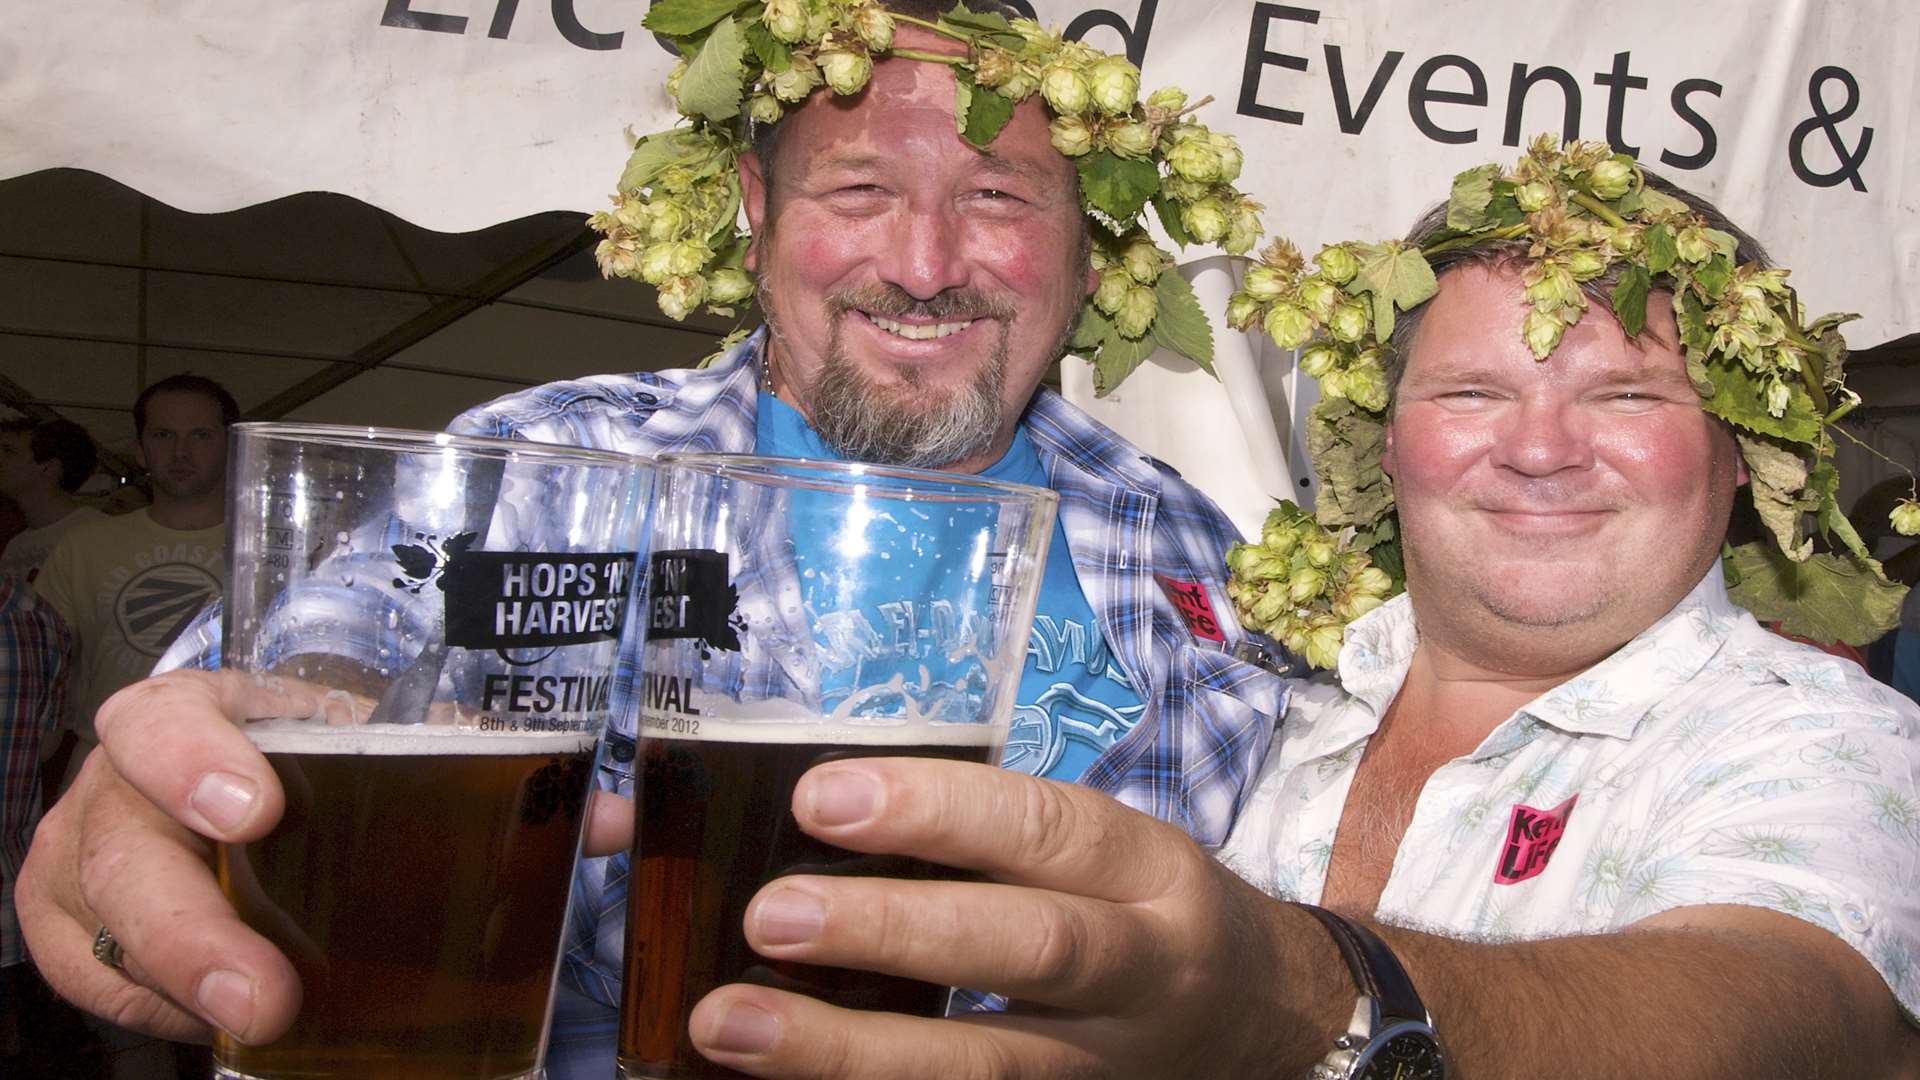 Raise at glass to the hops harvest at Kent Life